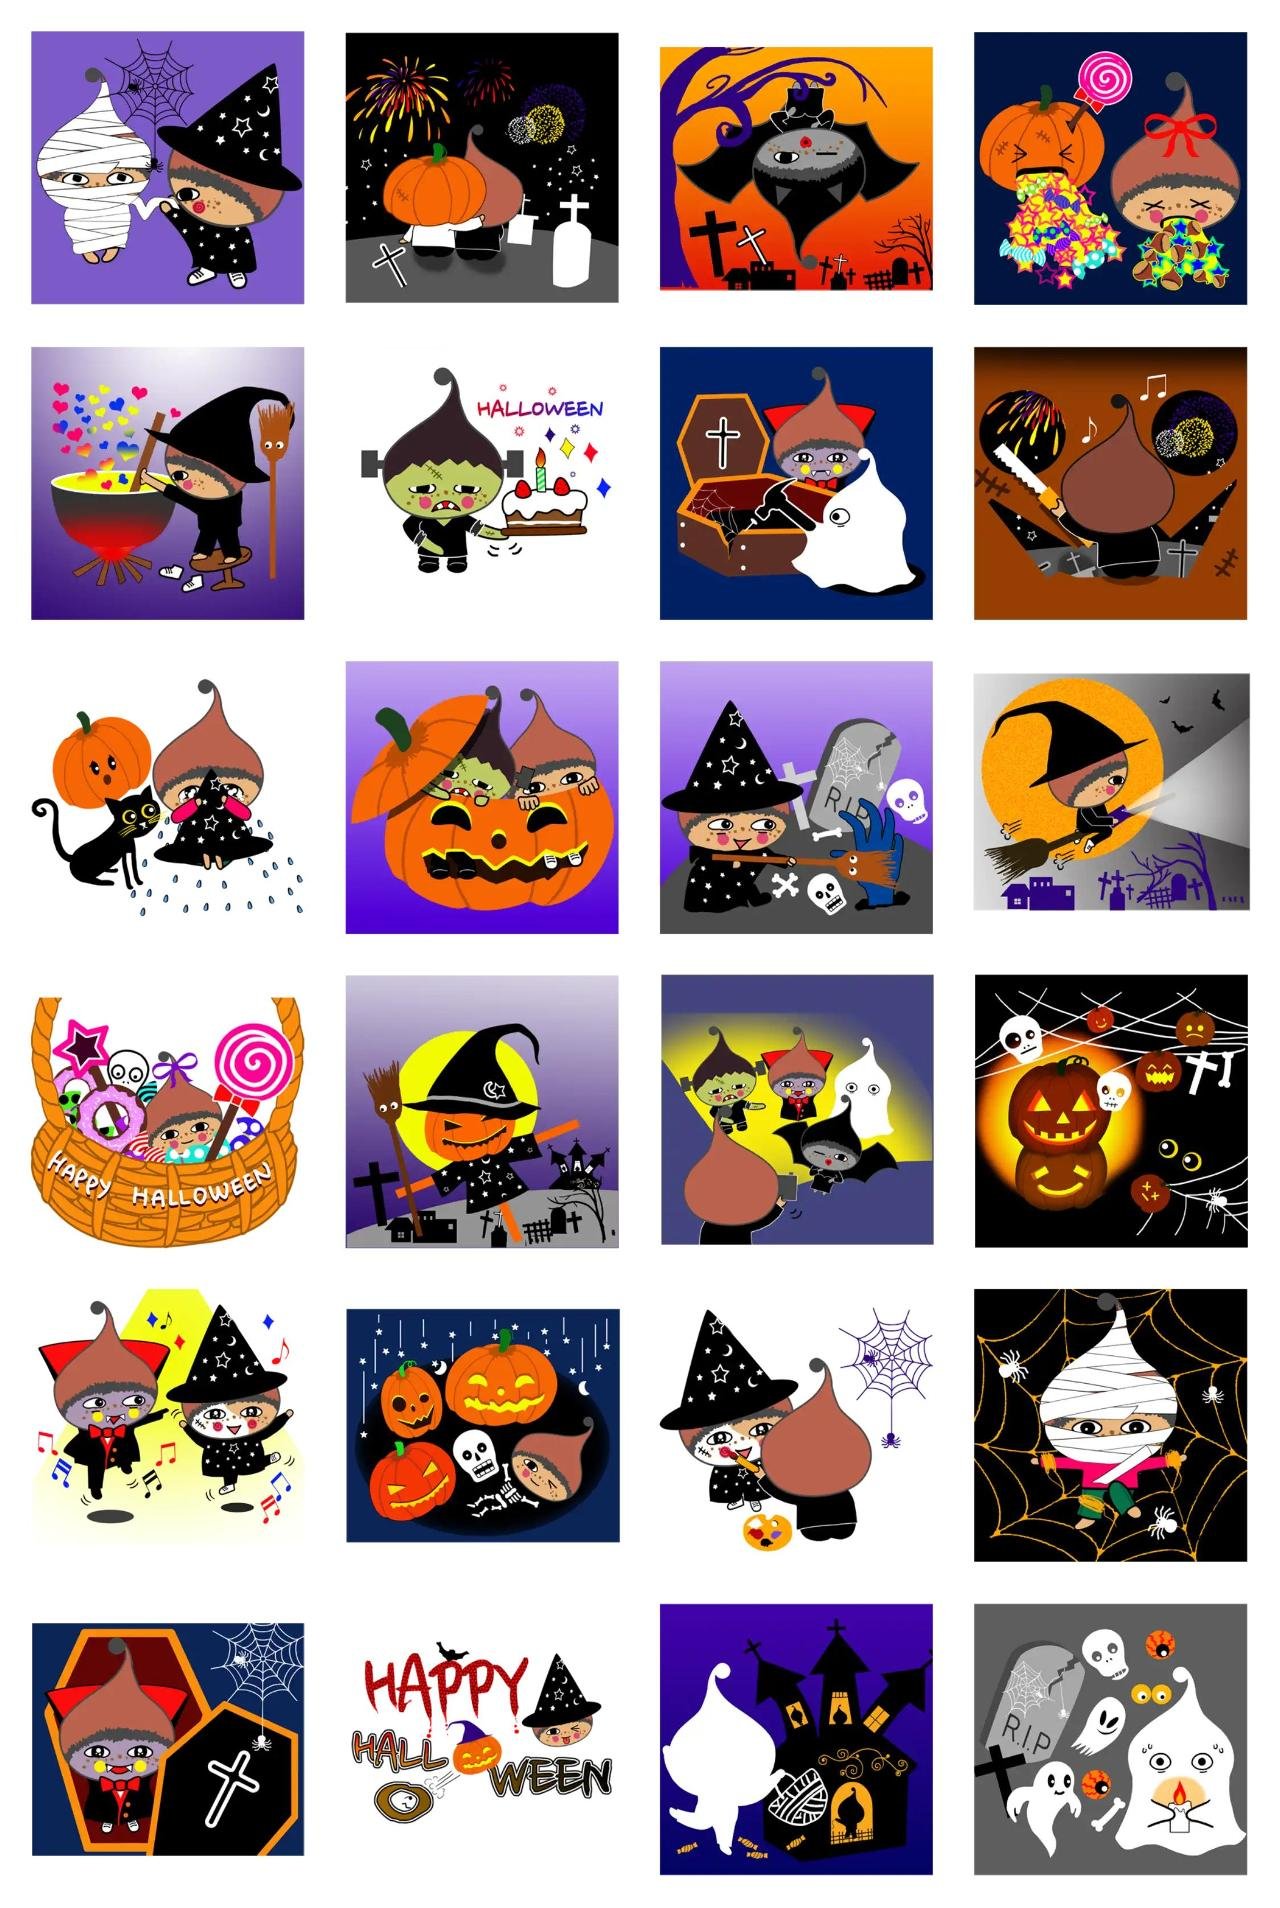 Happy Halloween in Kimtori Gag,Halloween sticker pack for Whatsapp, Telegram, Signal, and others chatting and message apps